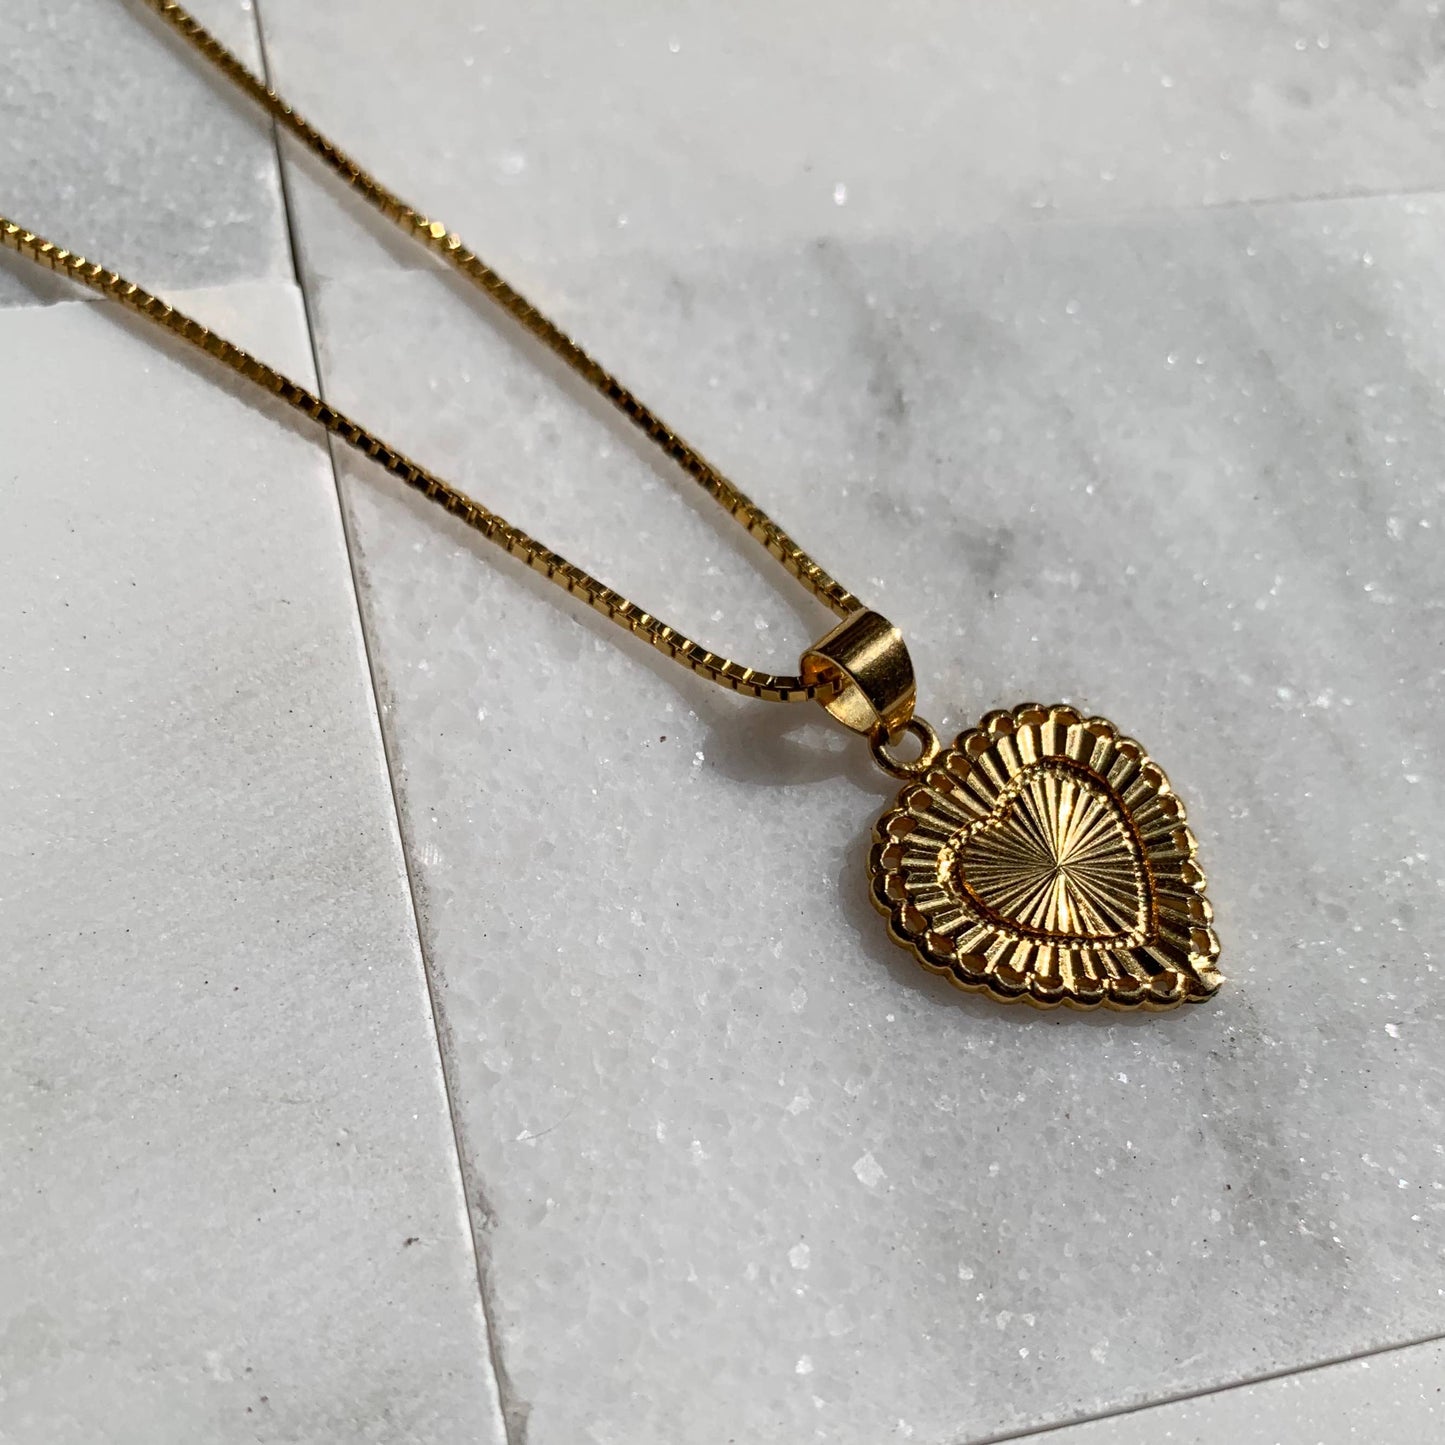 Heartbreaker Gold Heart Necklace. Gold Filled. Gold Jewelry